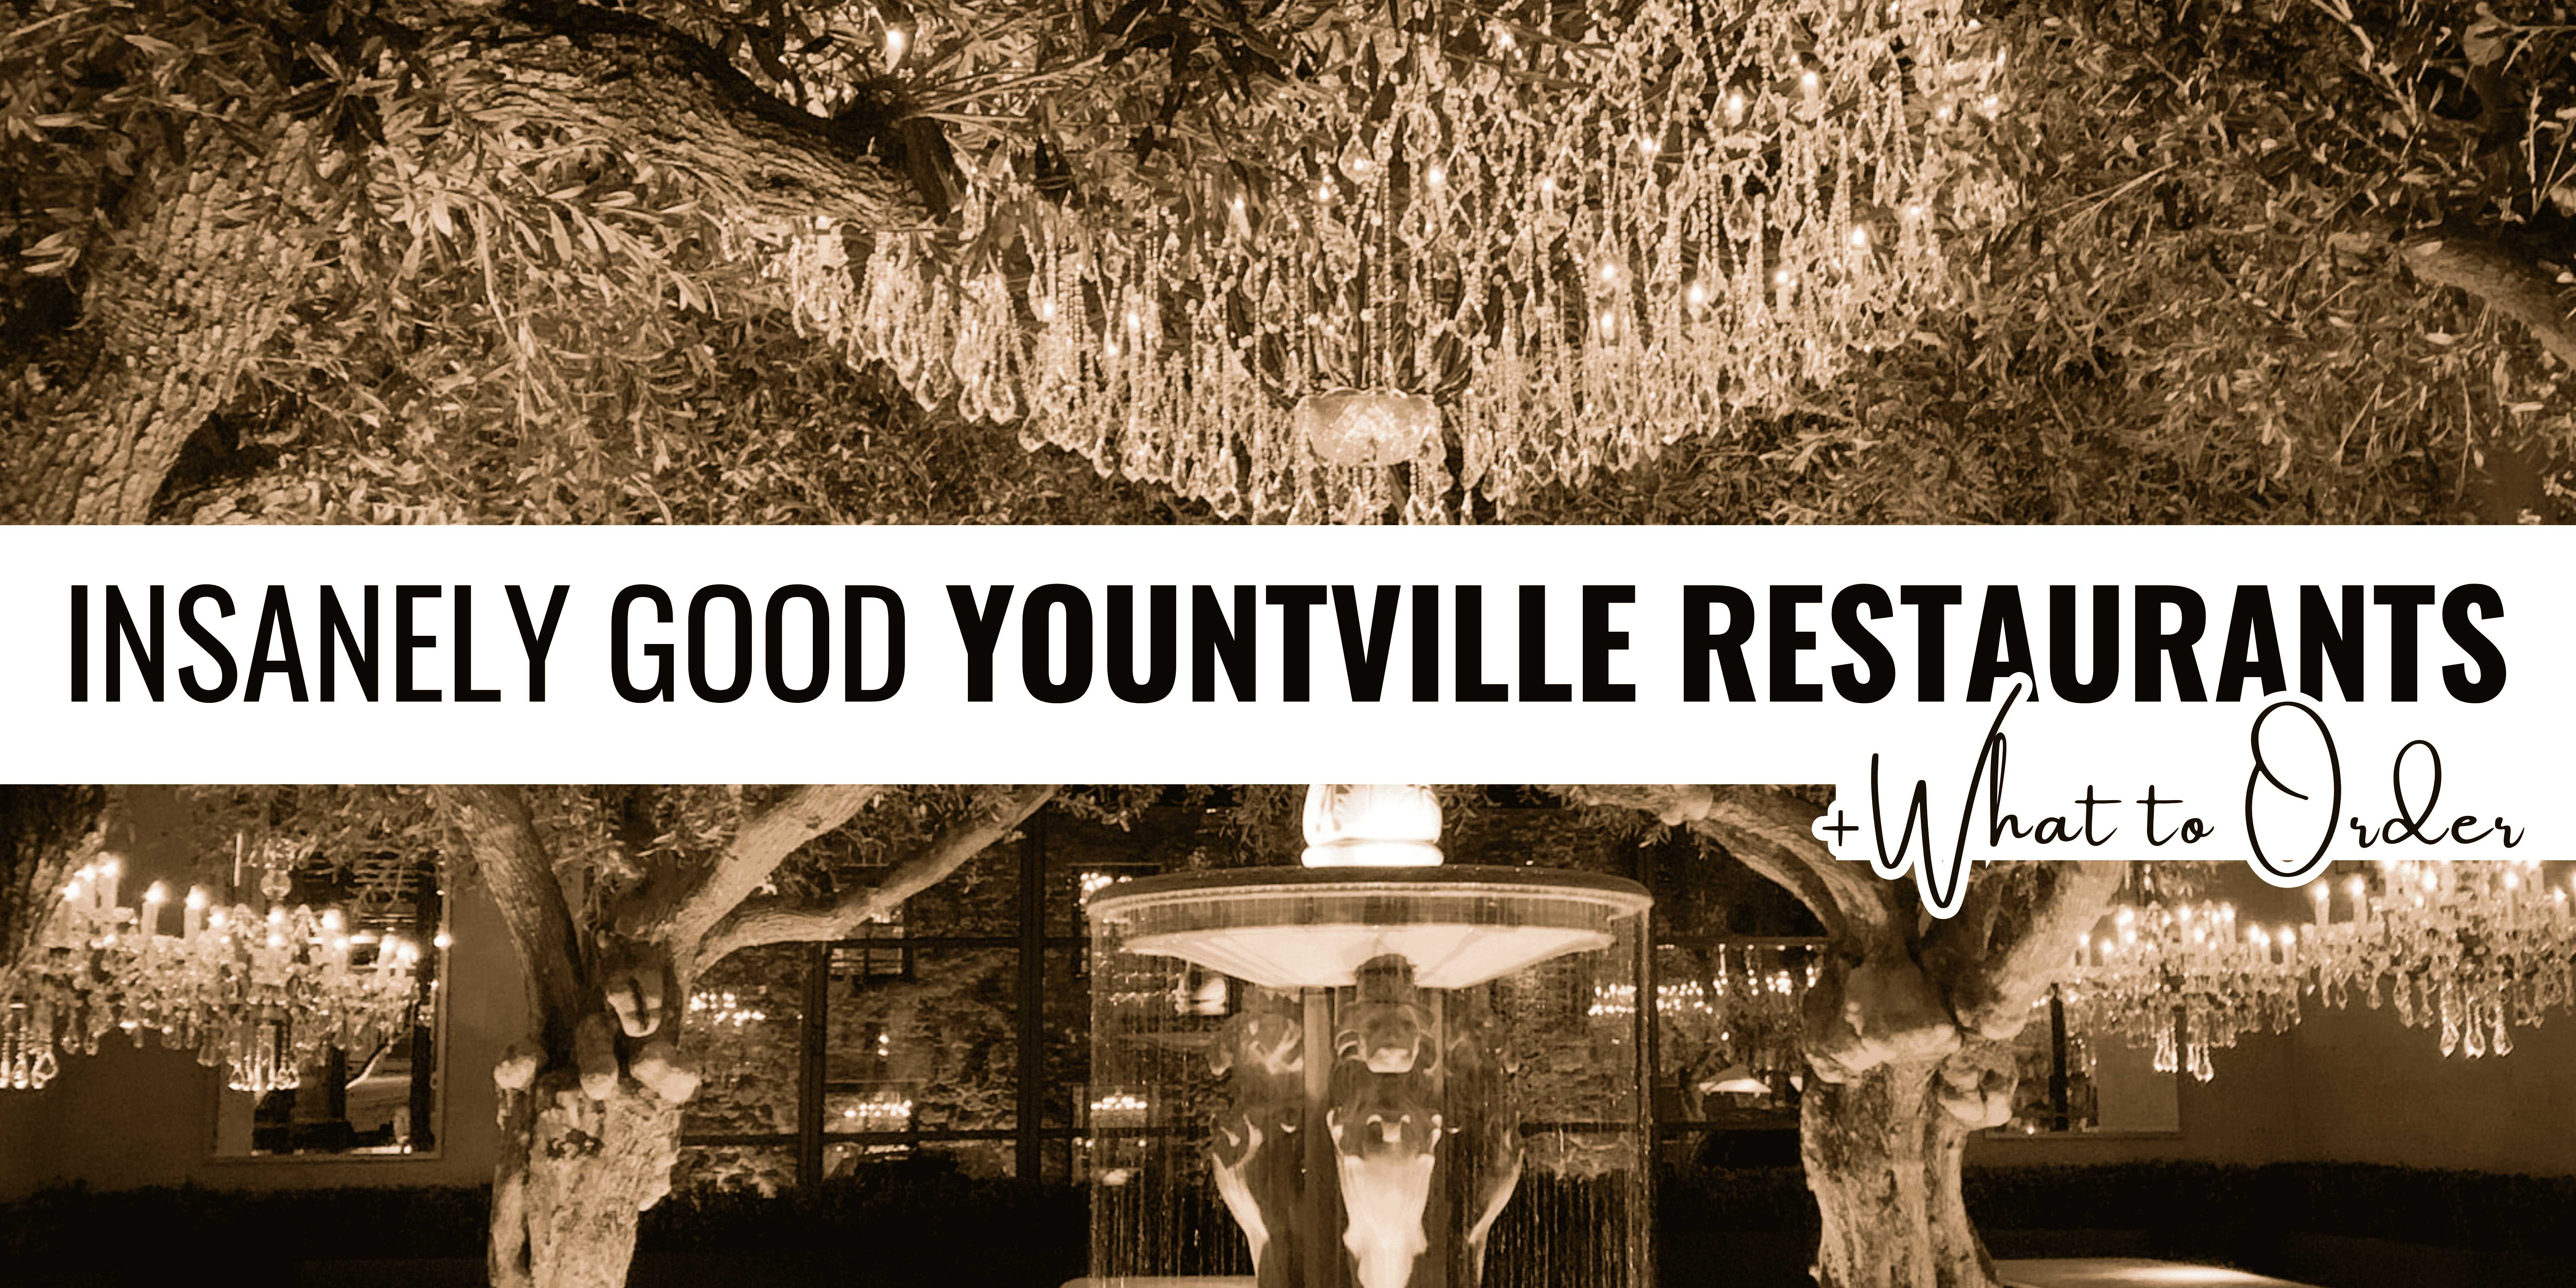 Insanely good Yountville Restaurants and What to order